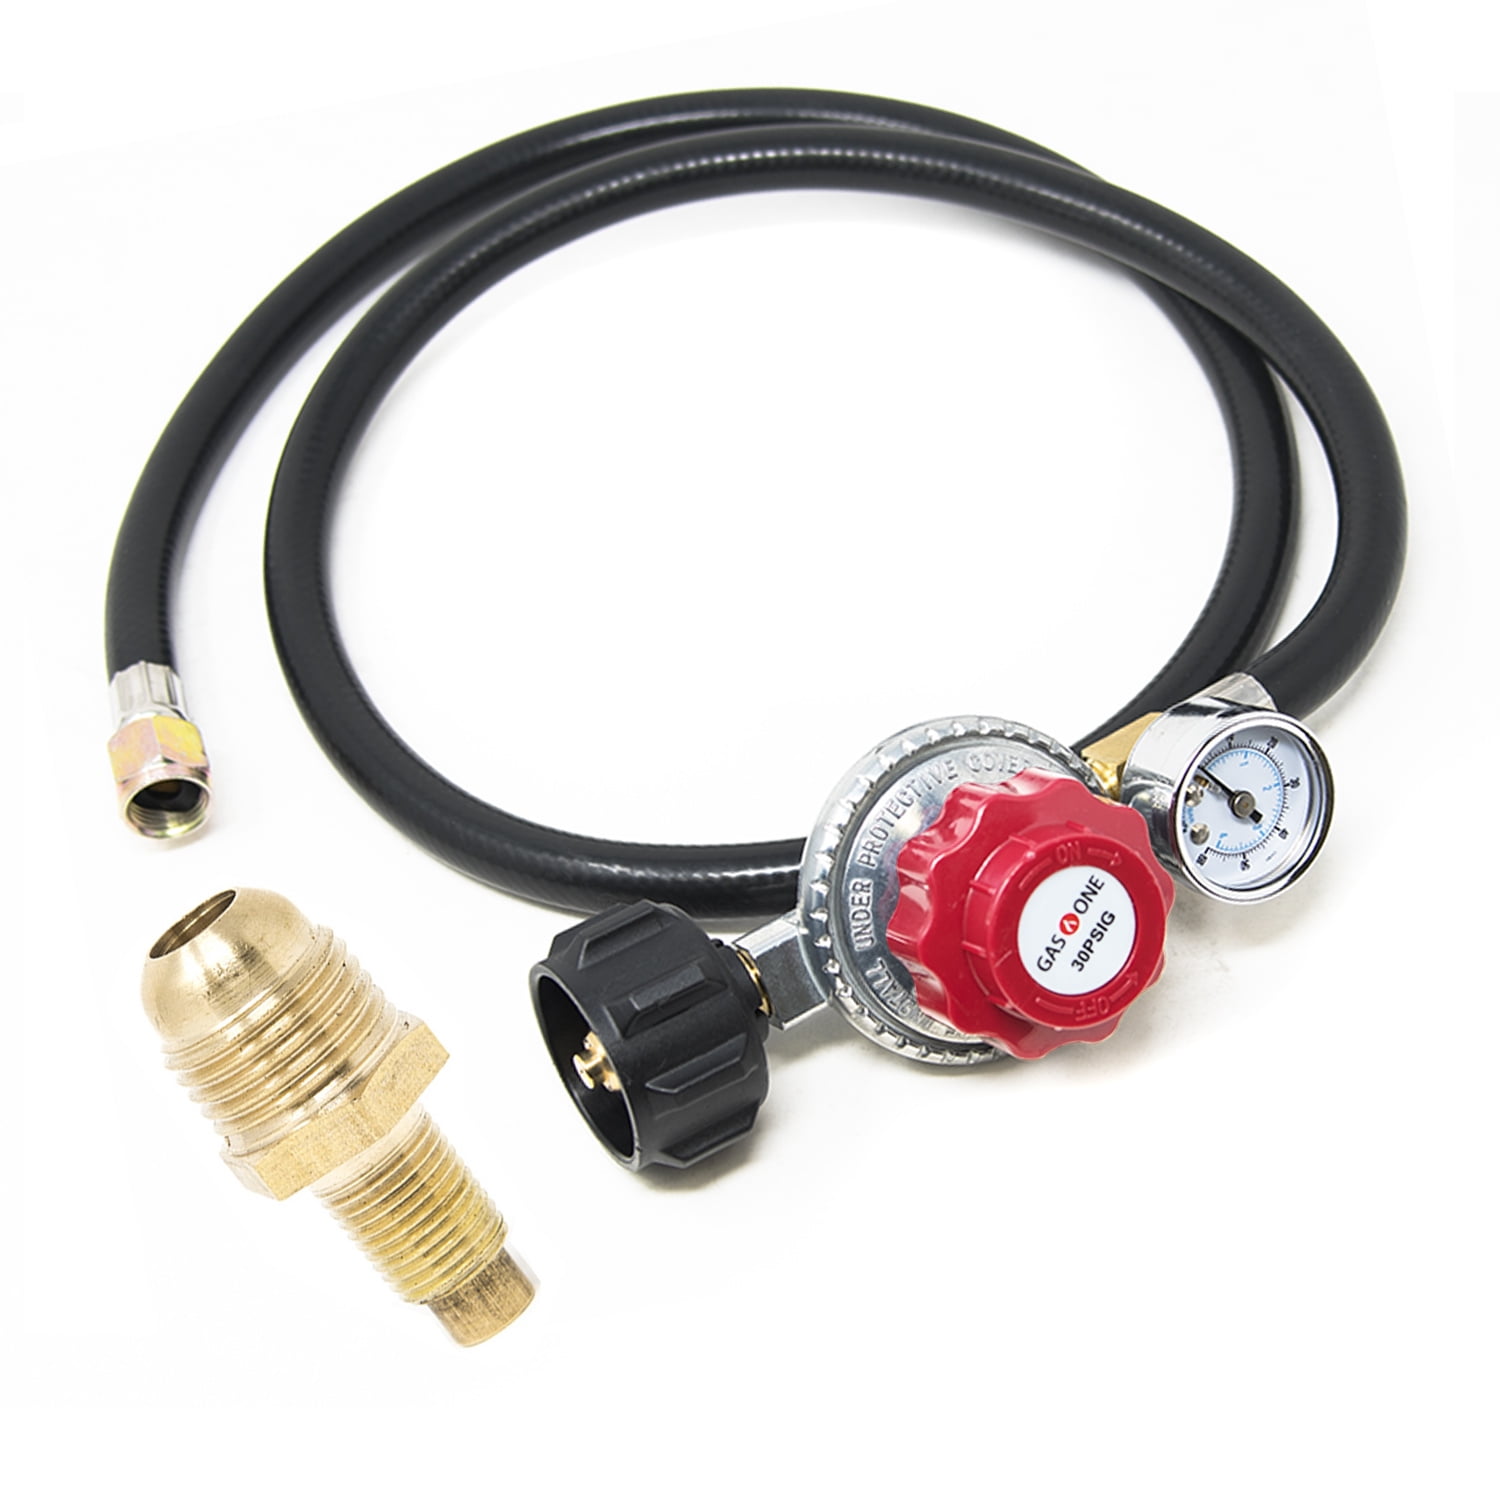 Onlyfire ACME 21 inch Low Pressure Propane Hose and Regulator Kit with 1/8" N... 